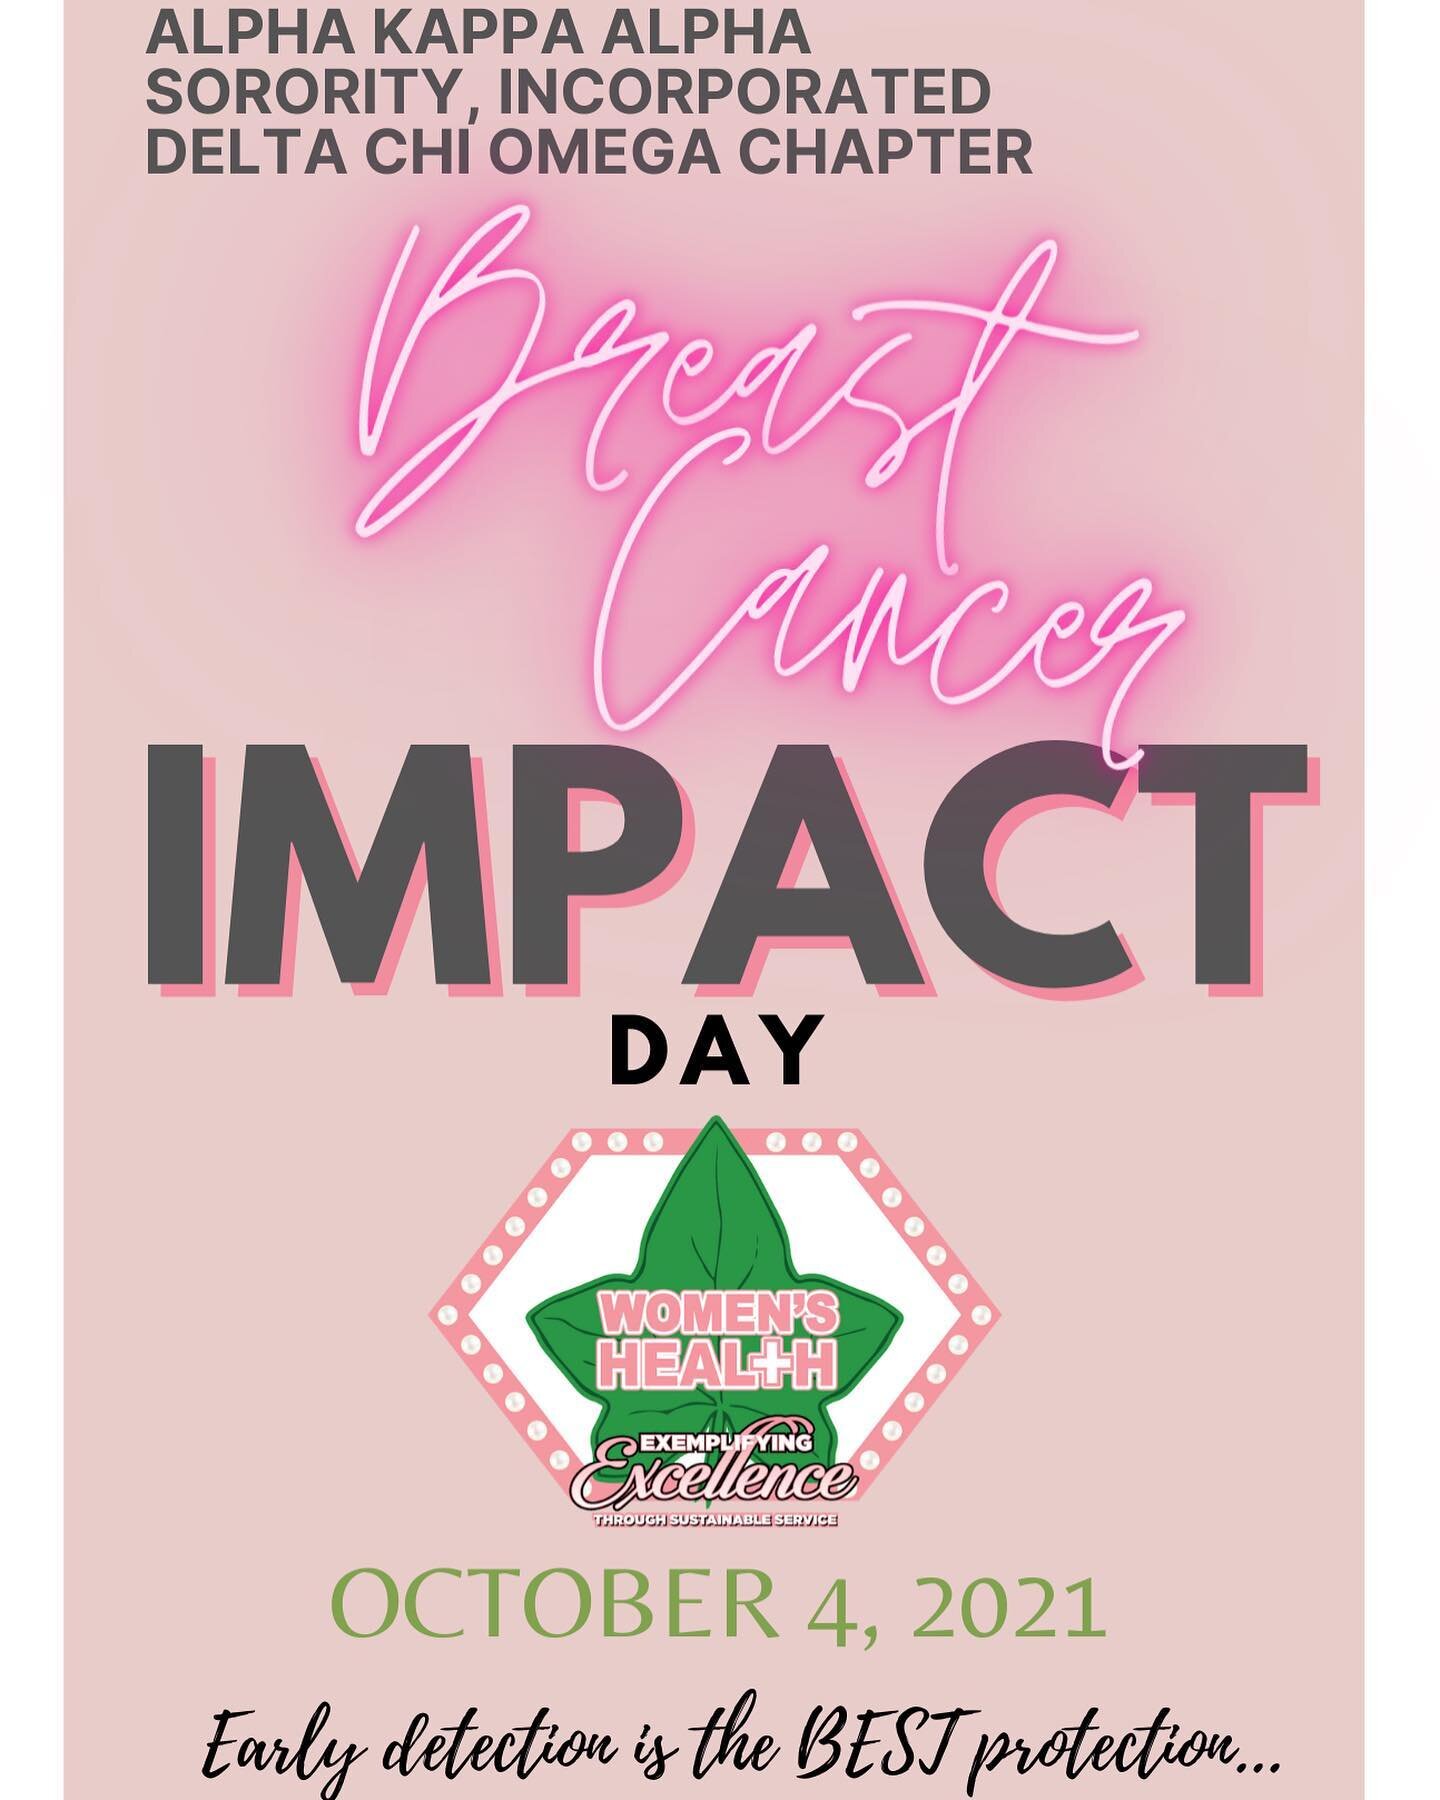 This month let's raise our efforts regarding breast cancer awareness, care and fighting for the cure.  Make sure you:
💗Get your mammogram.
💗Call someone and encourage them to get theirs.
💗Share health information within your families. Too often we